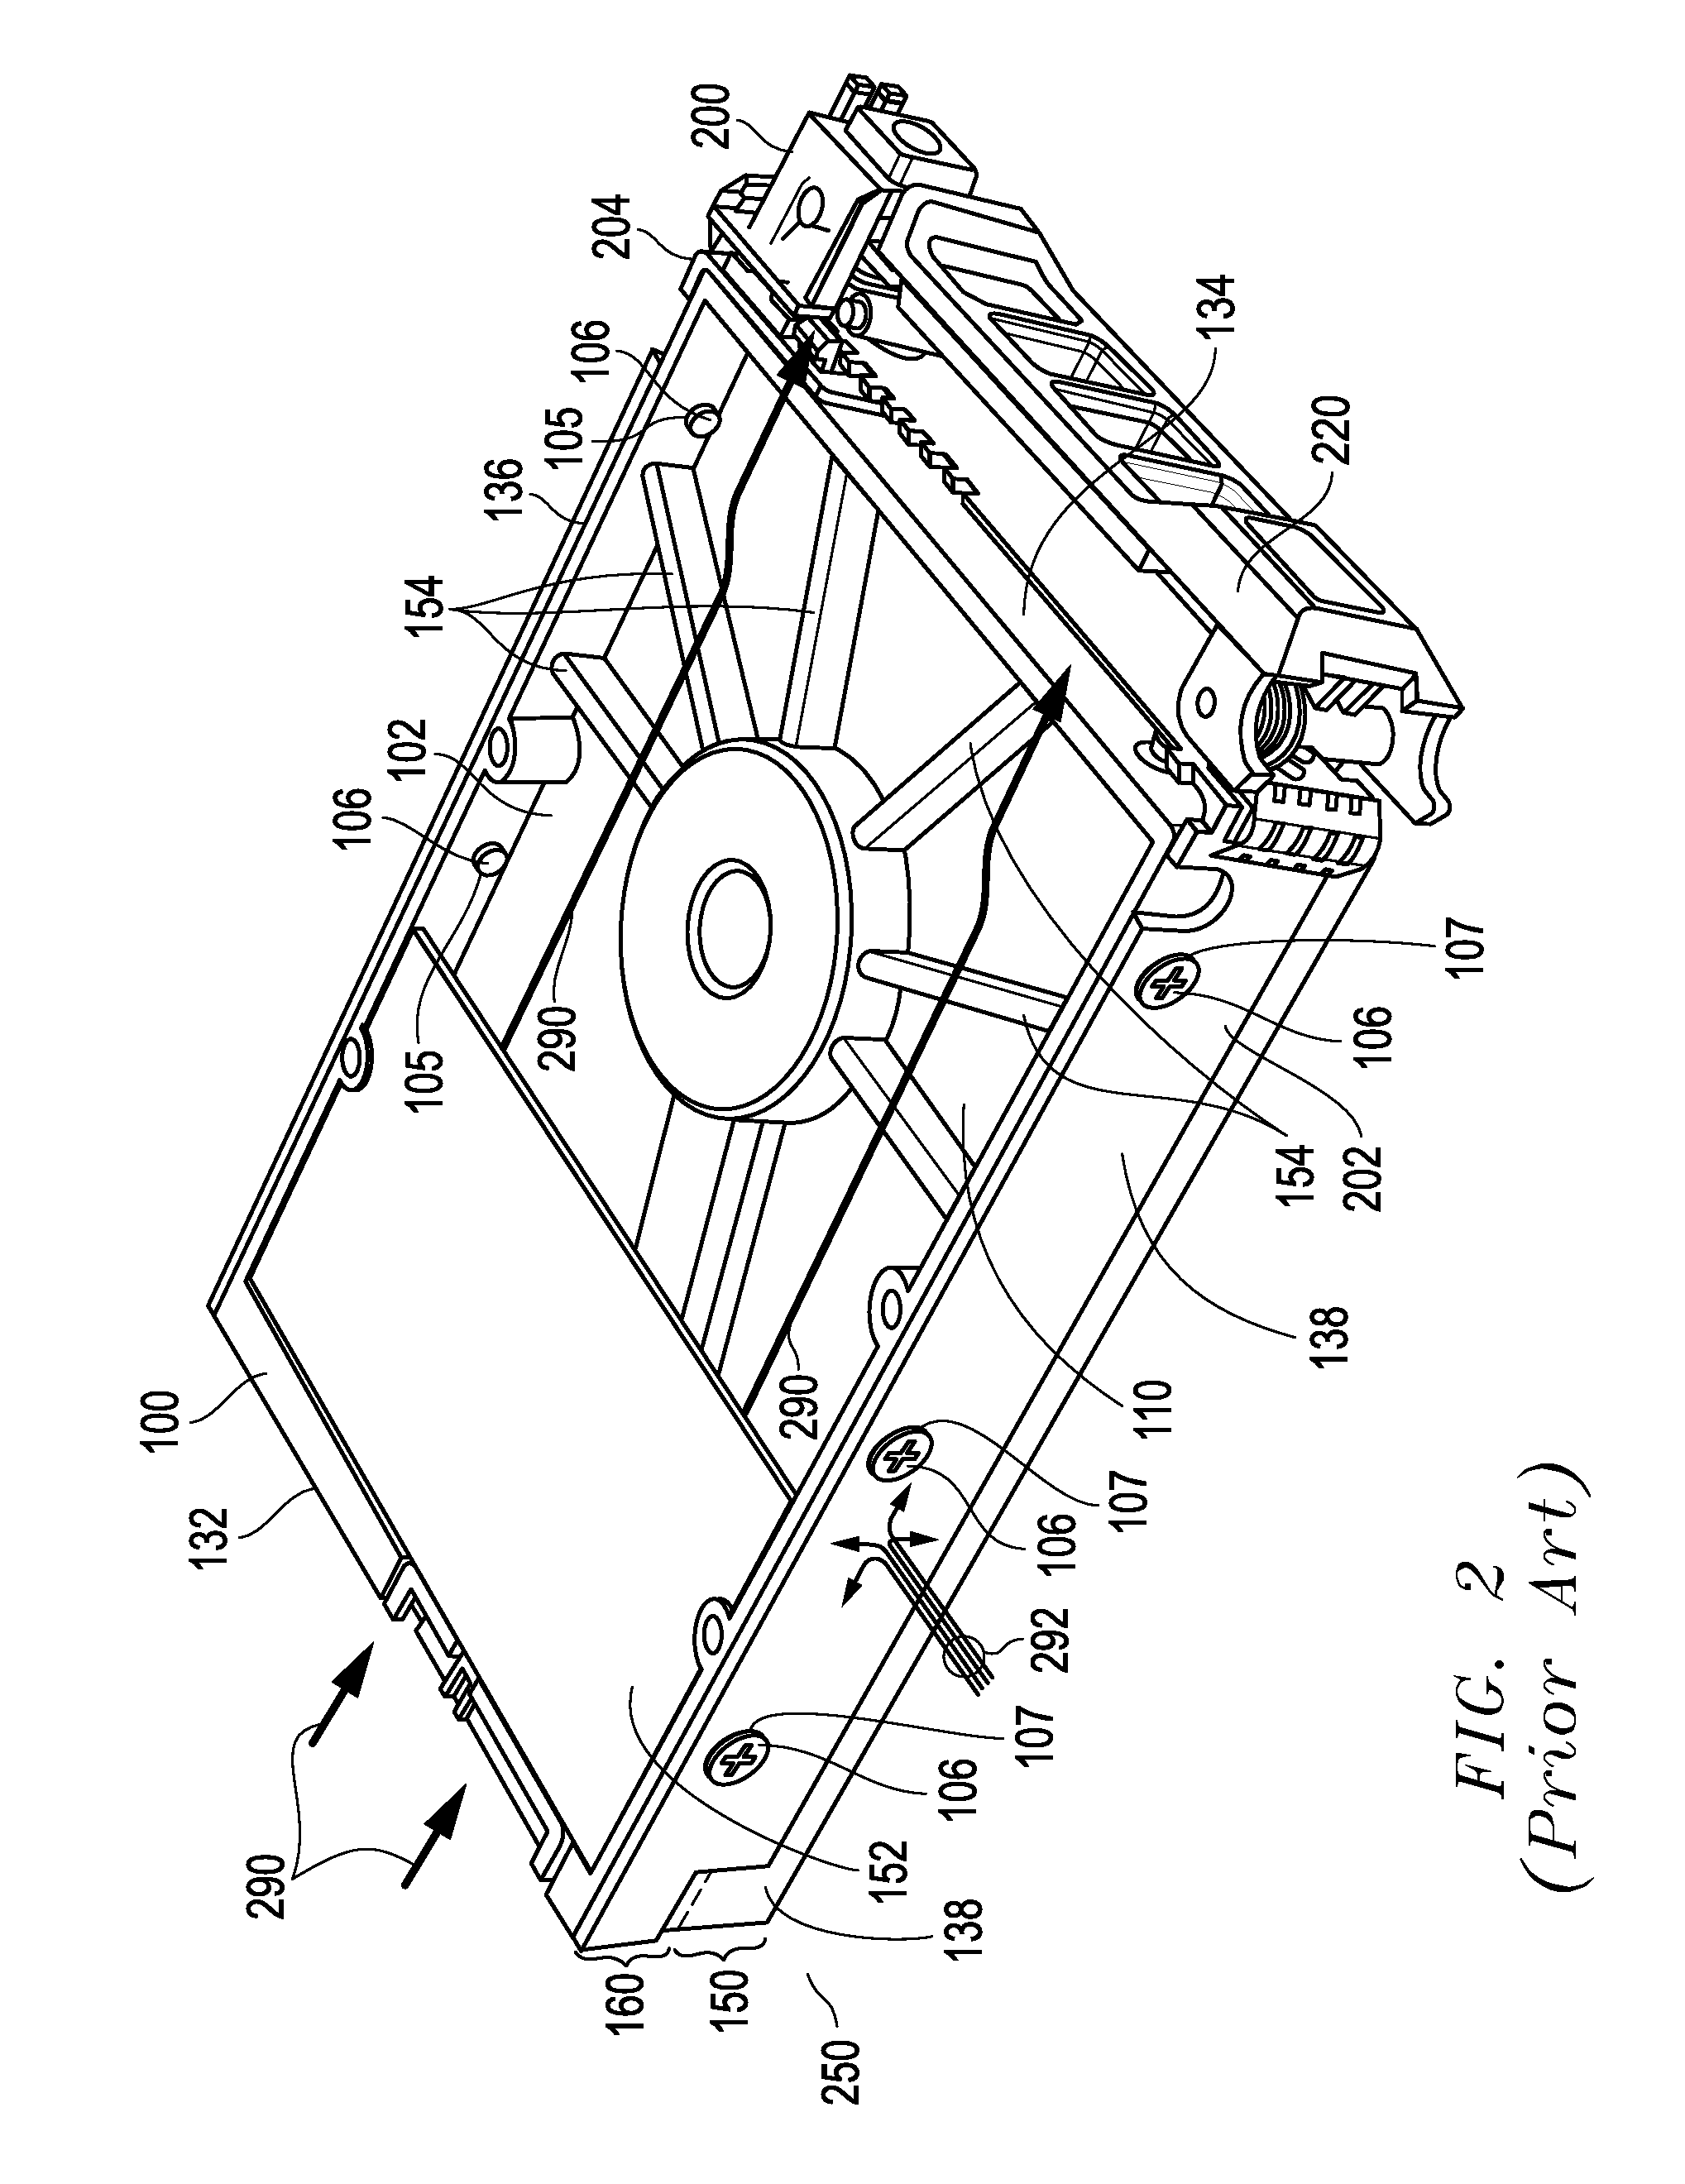 Hard disk drive assemblies with open side wall areas